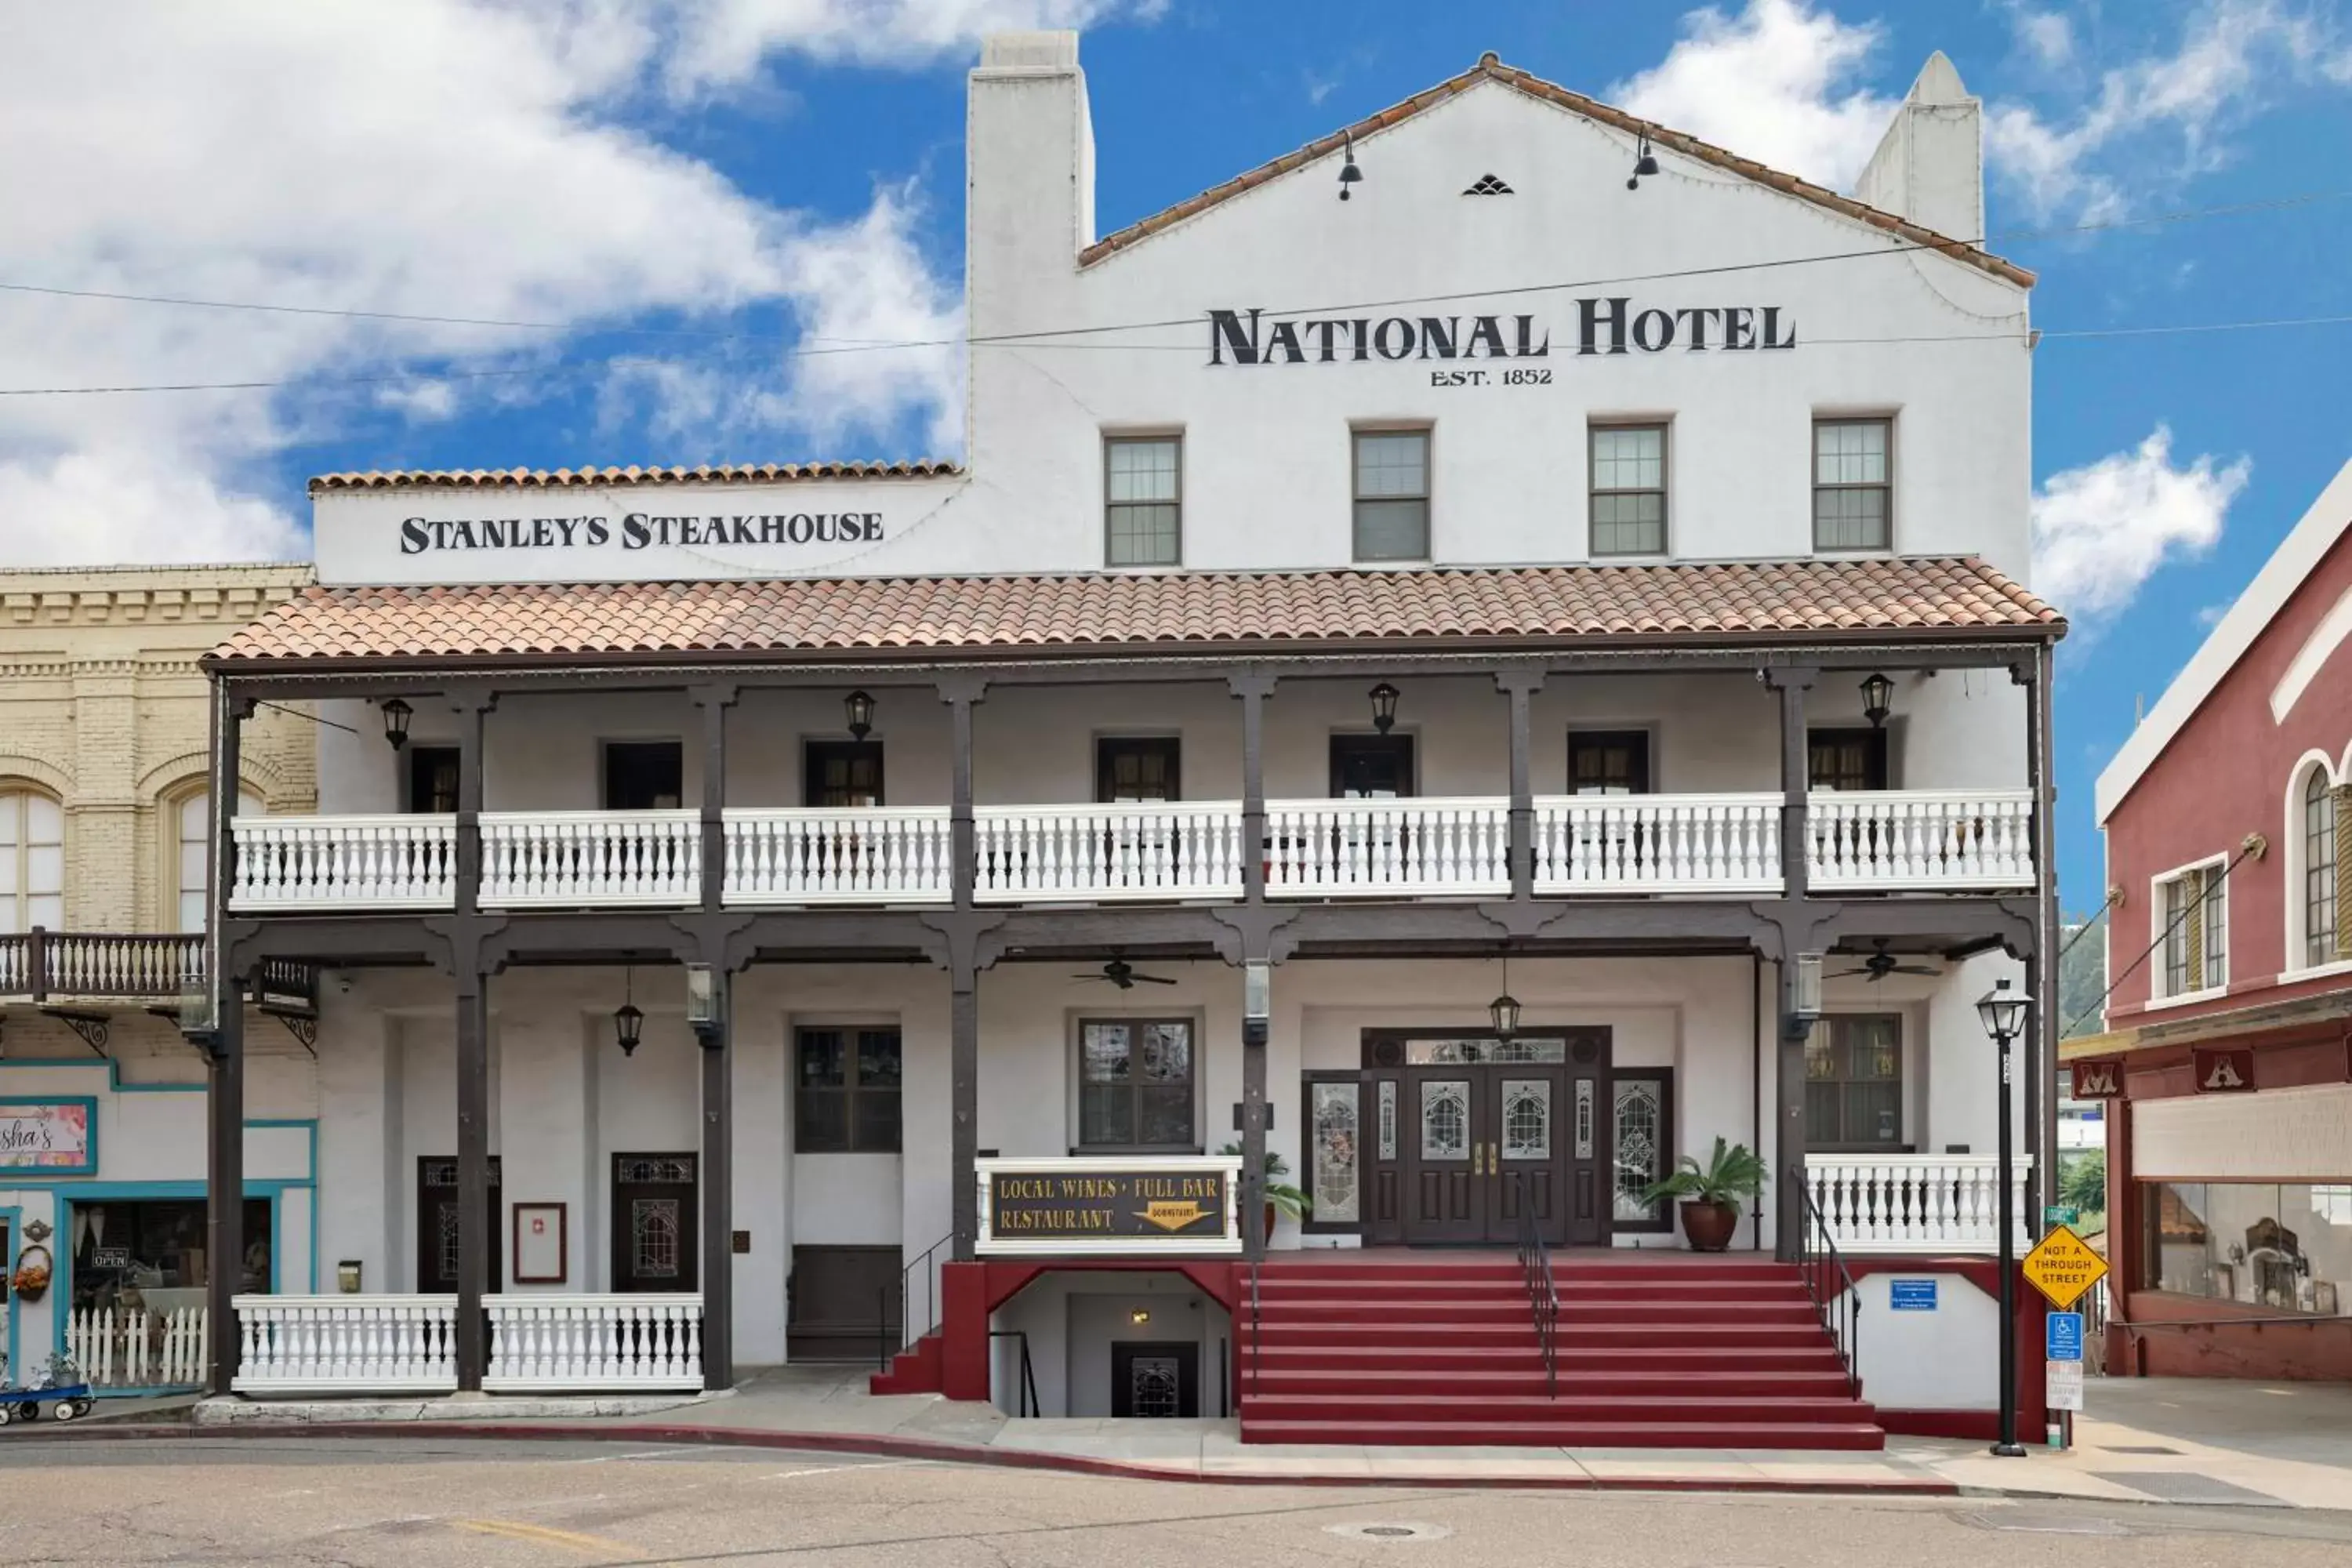 Property Building in National Hotel Jackson